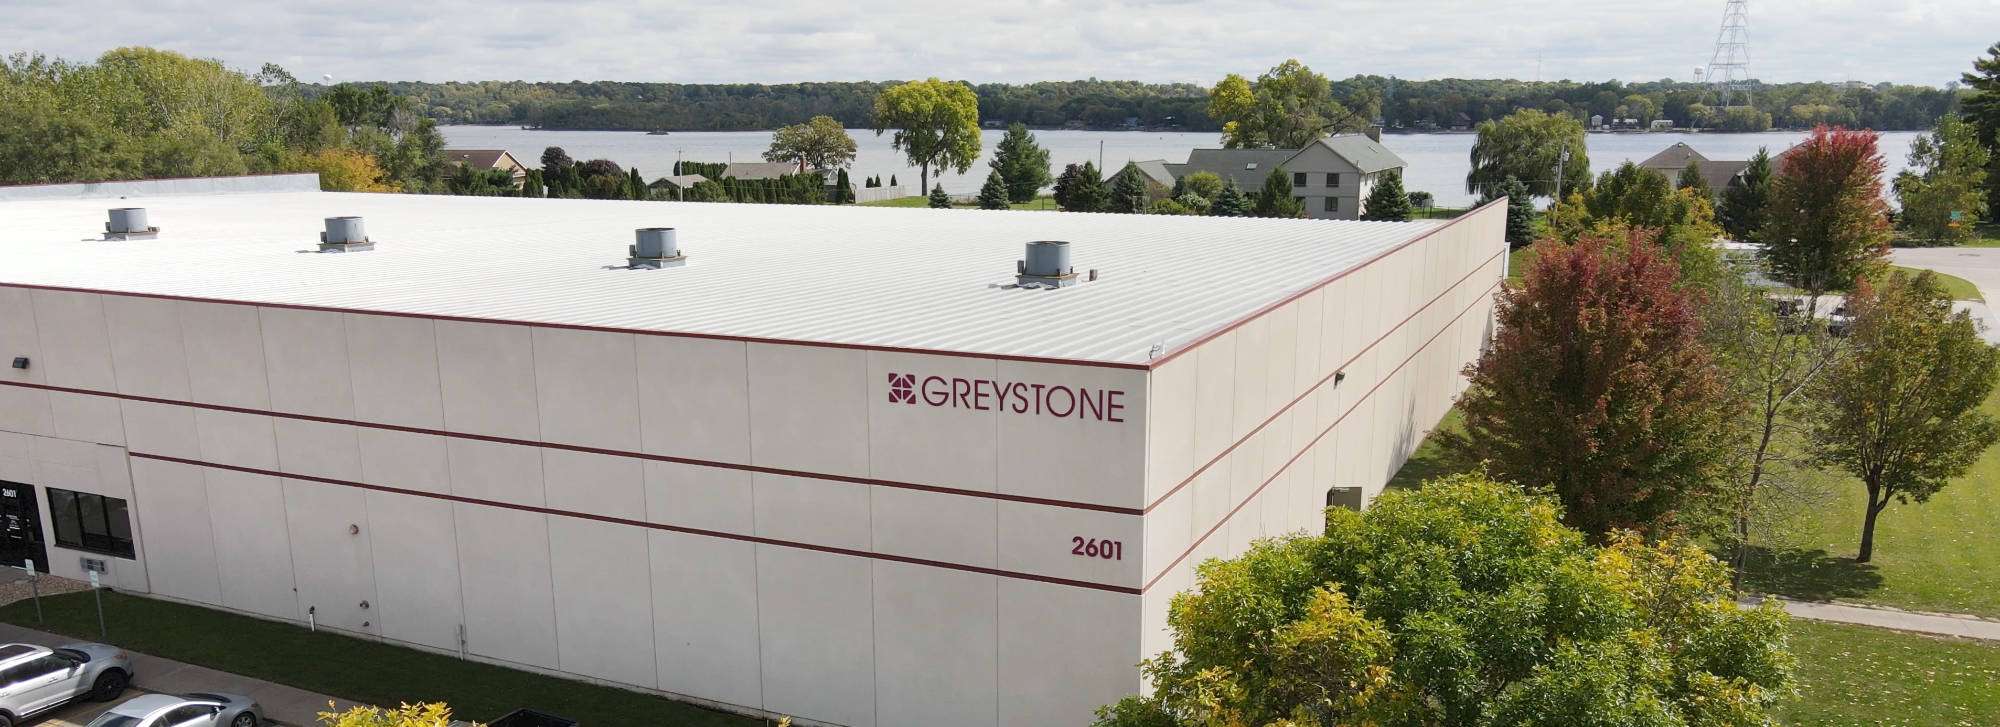 Greystone Pallets Manufacturing Plant, Bettendorf, IA.